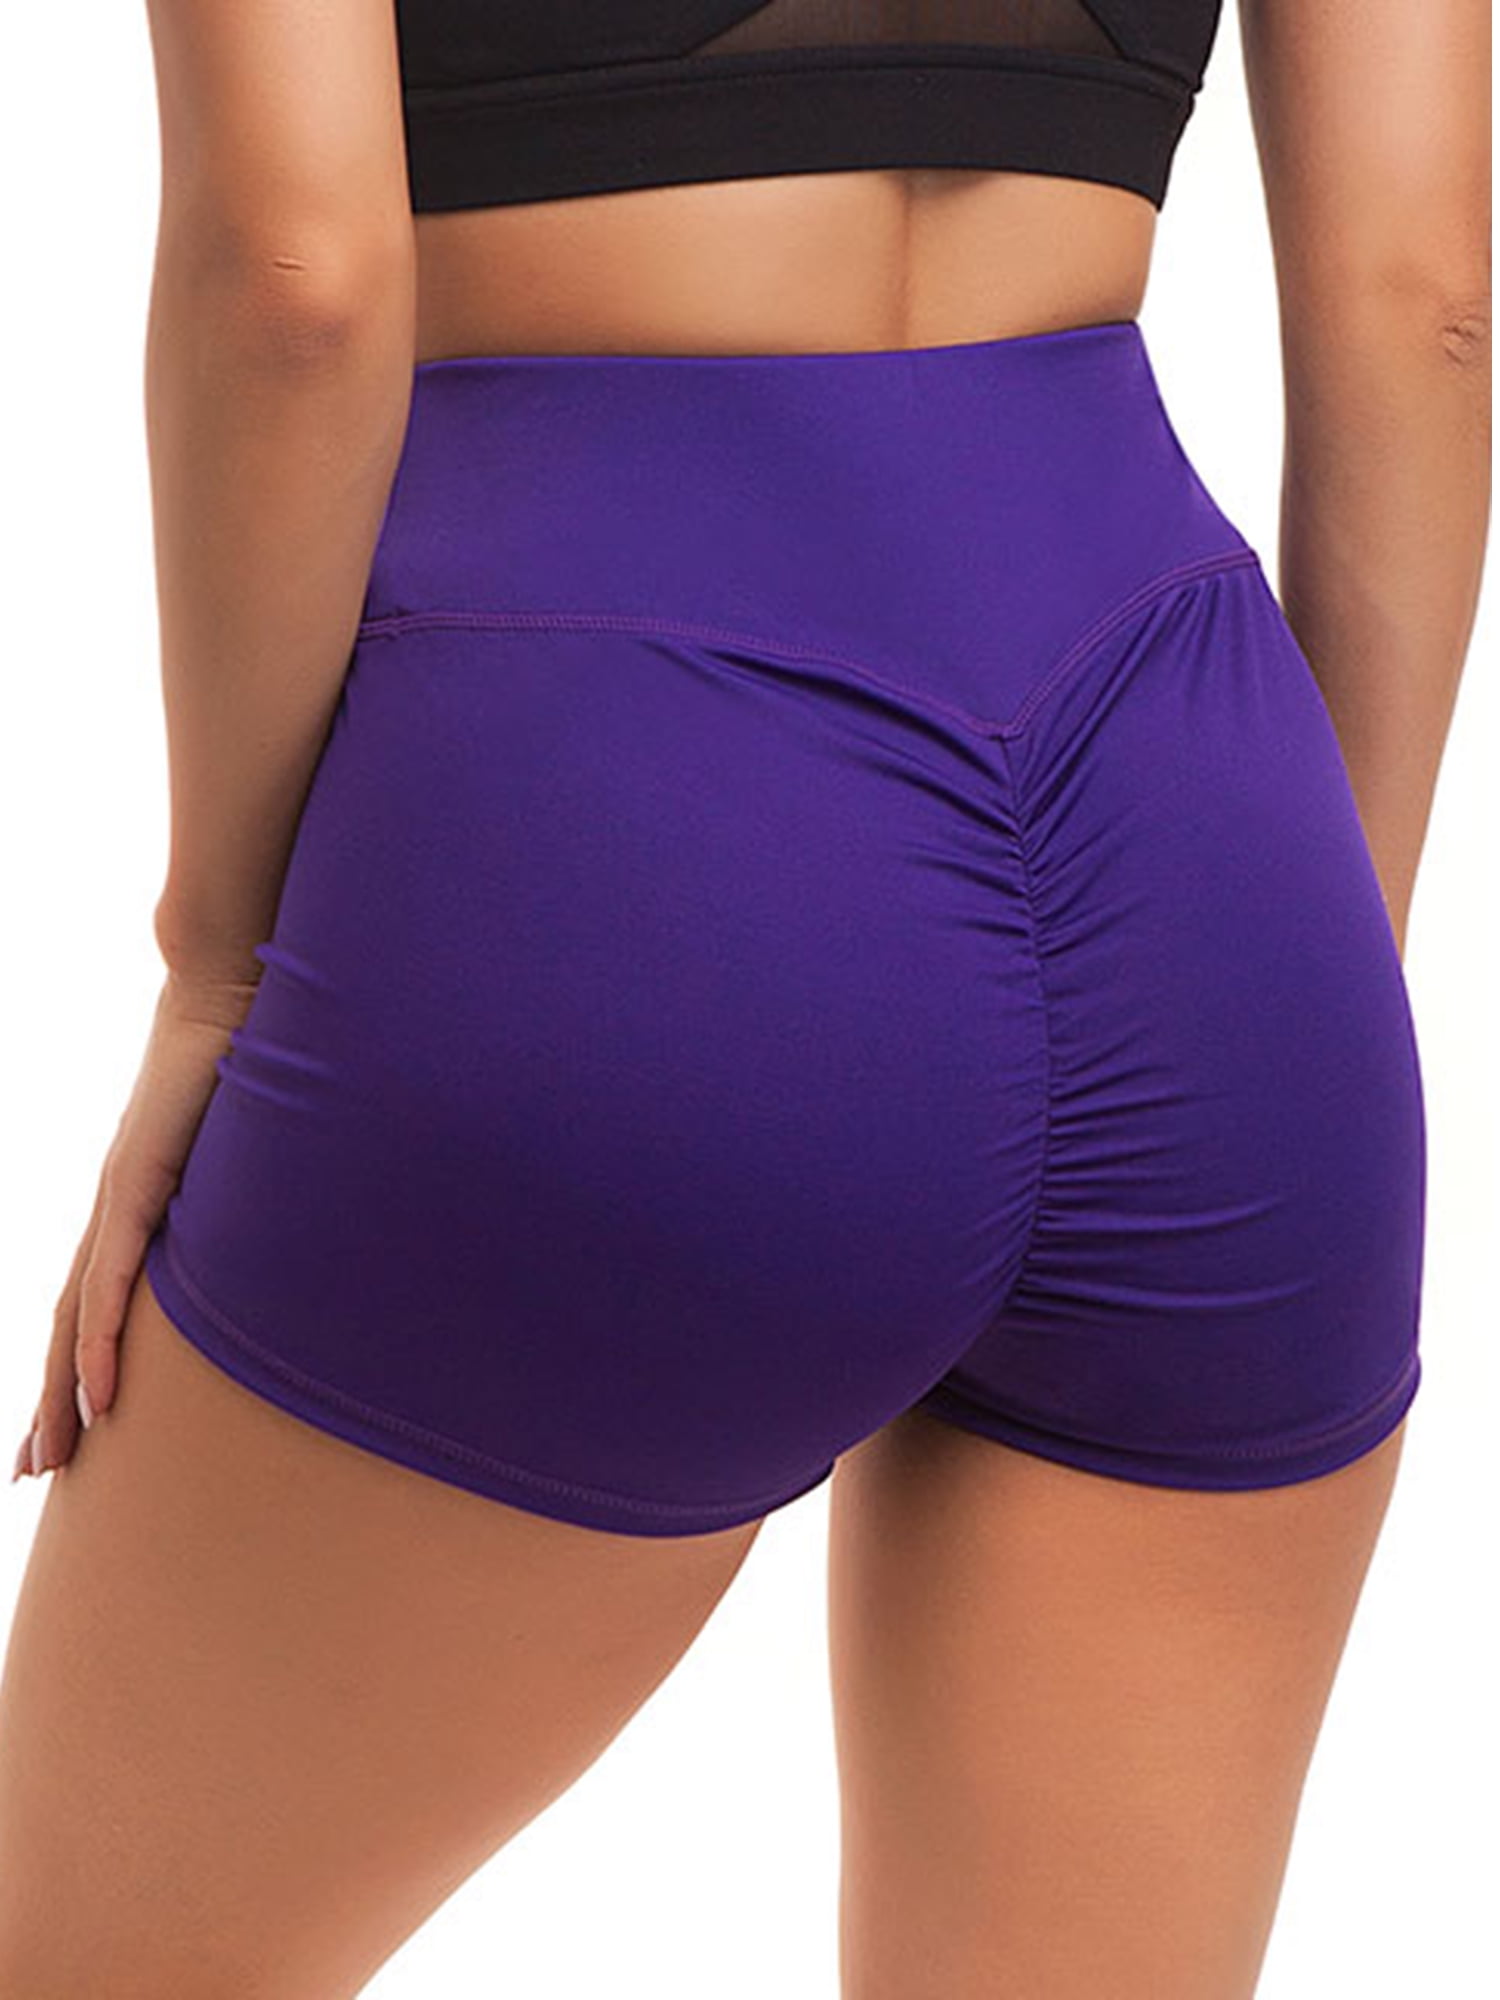 HOMETA Scrunch Butt Shorts Butt Lifting Booty Shorts for Women High Waisted Yoga Shorts Workout Gym Textured Ruched Shorts